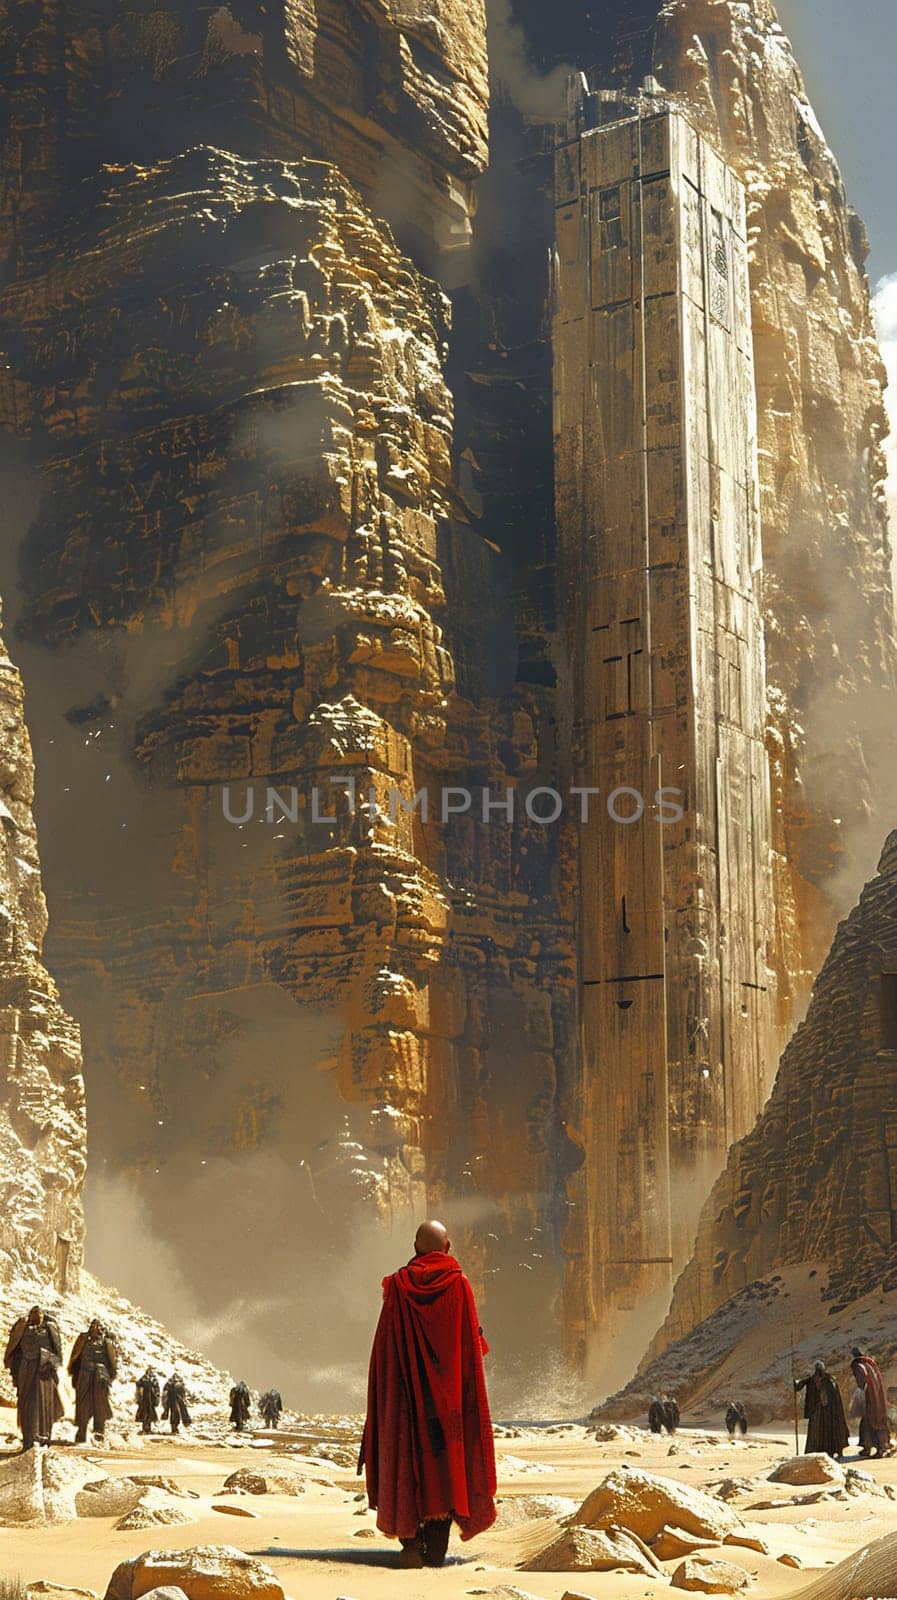 Explorer in an otherworldly canyon, echoing the majesty of uncharted terrains.